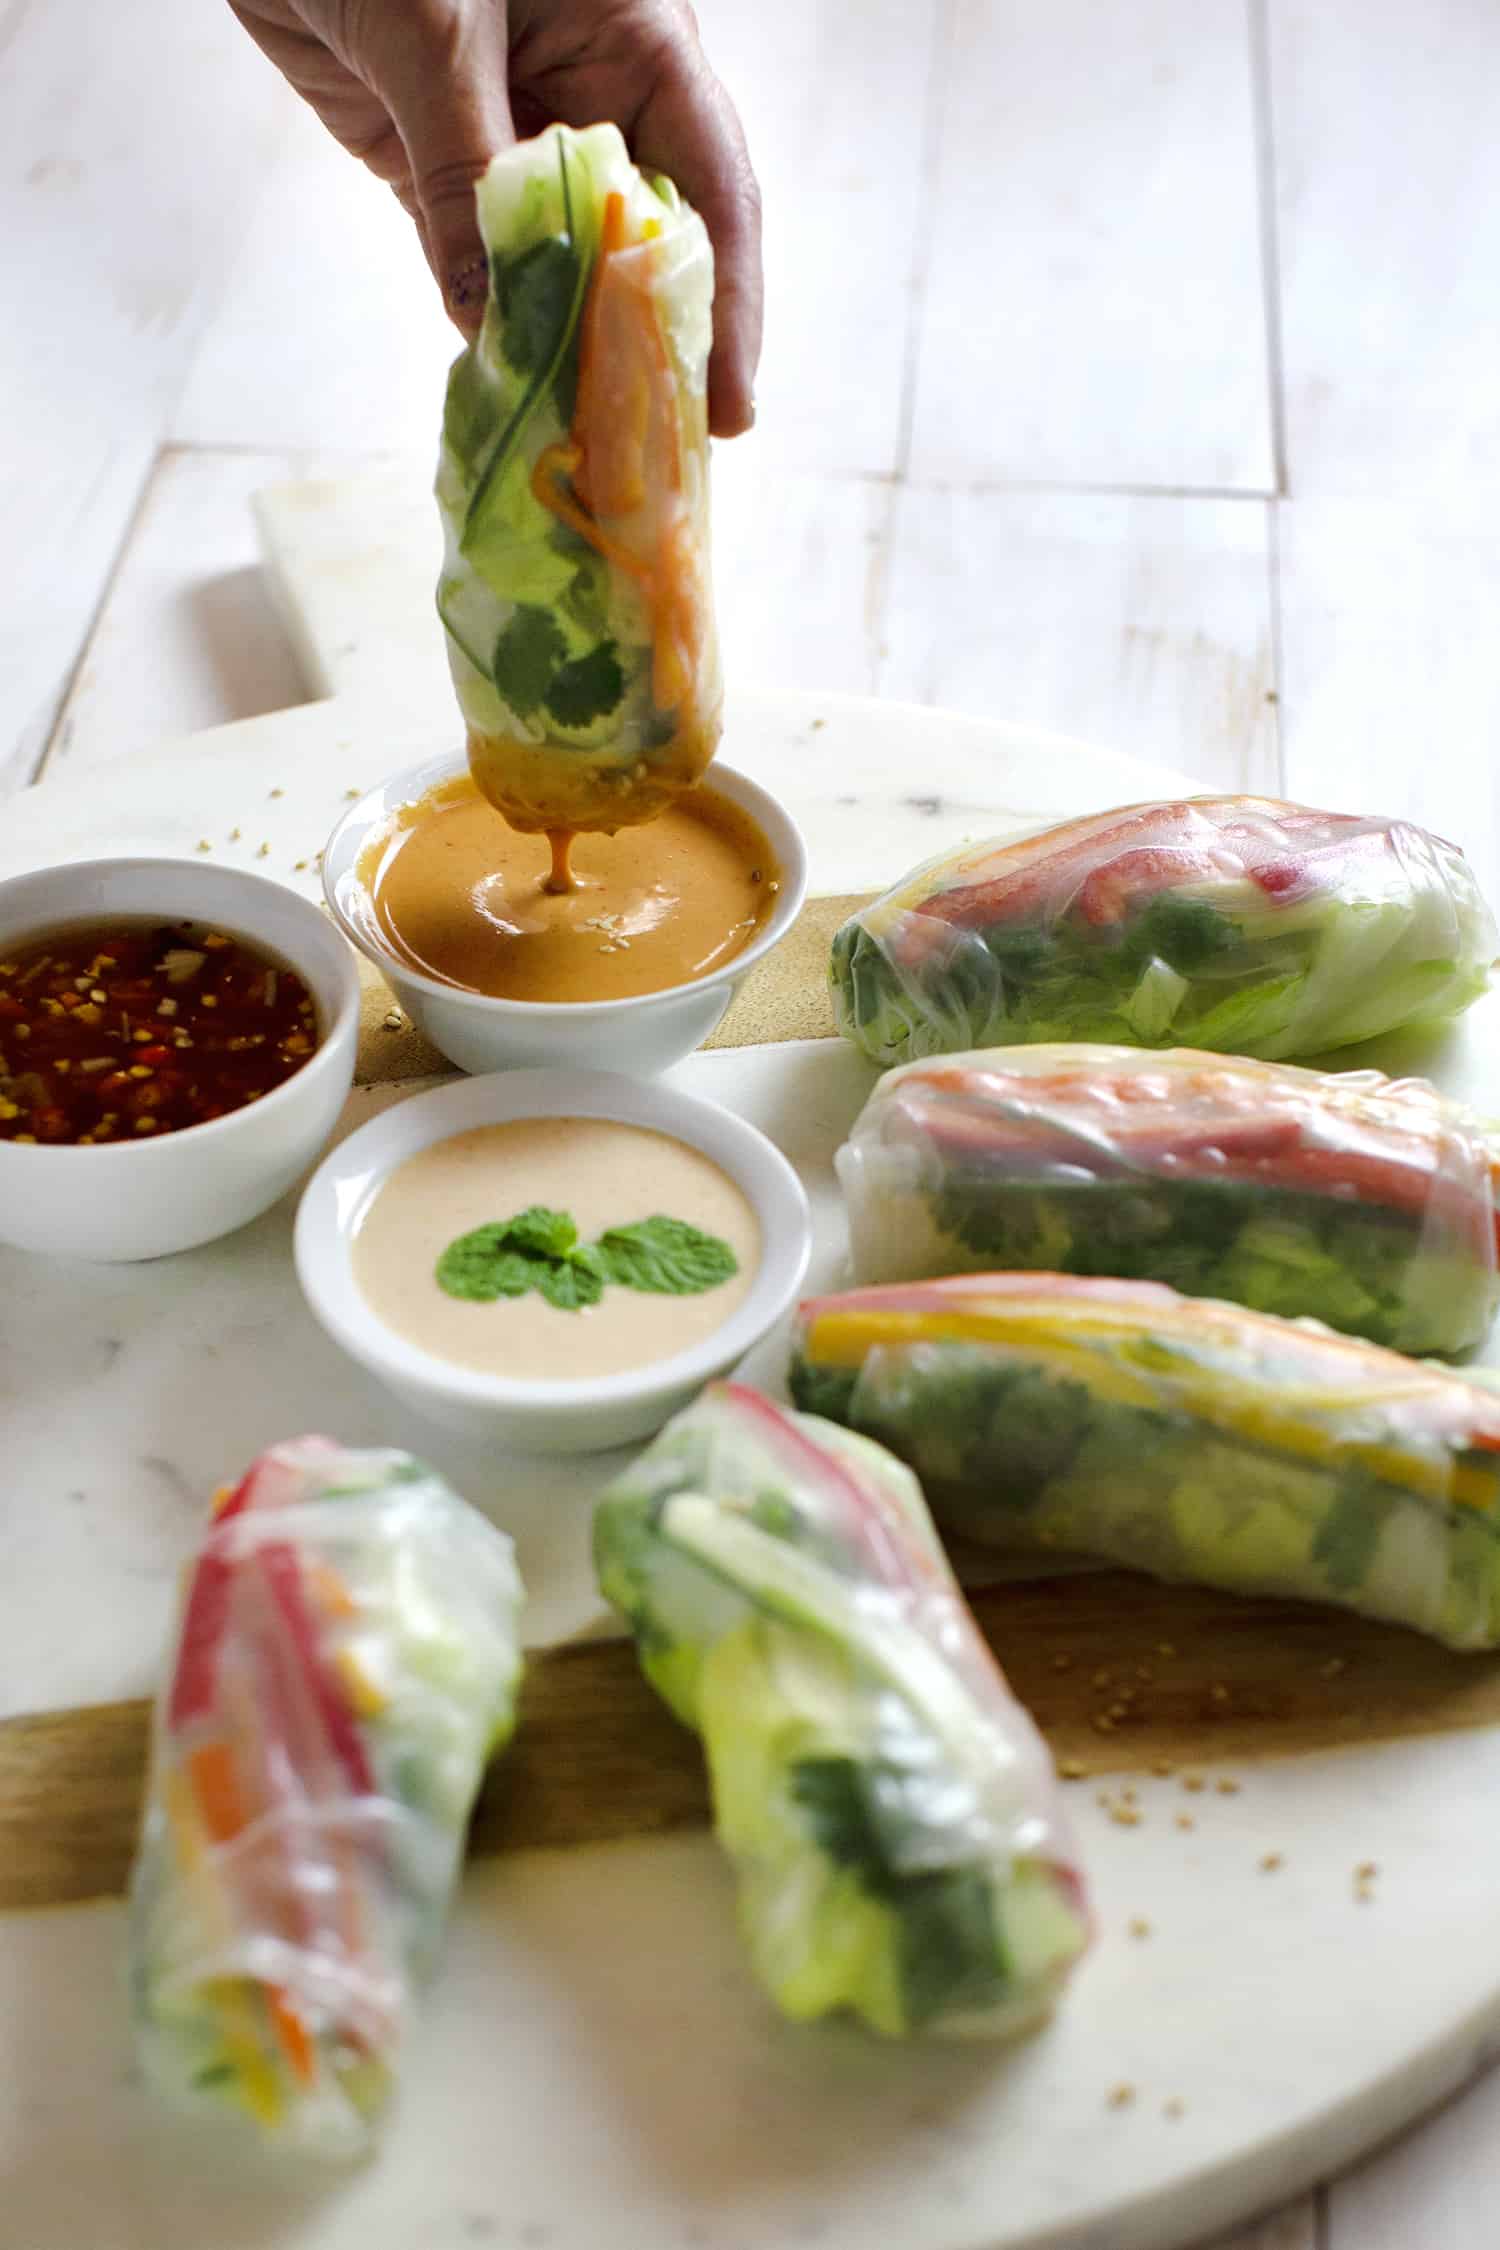 dipping spring roll into sauce